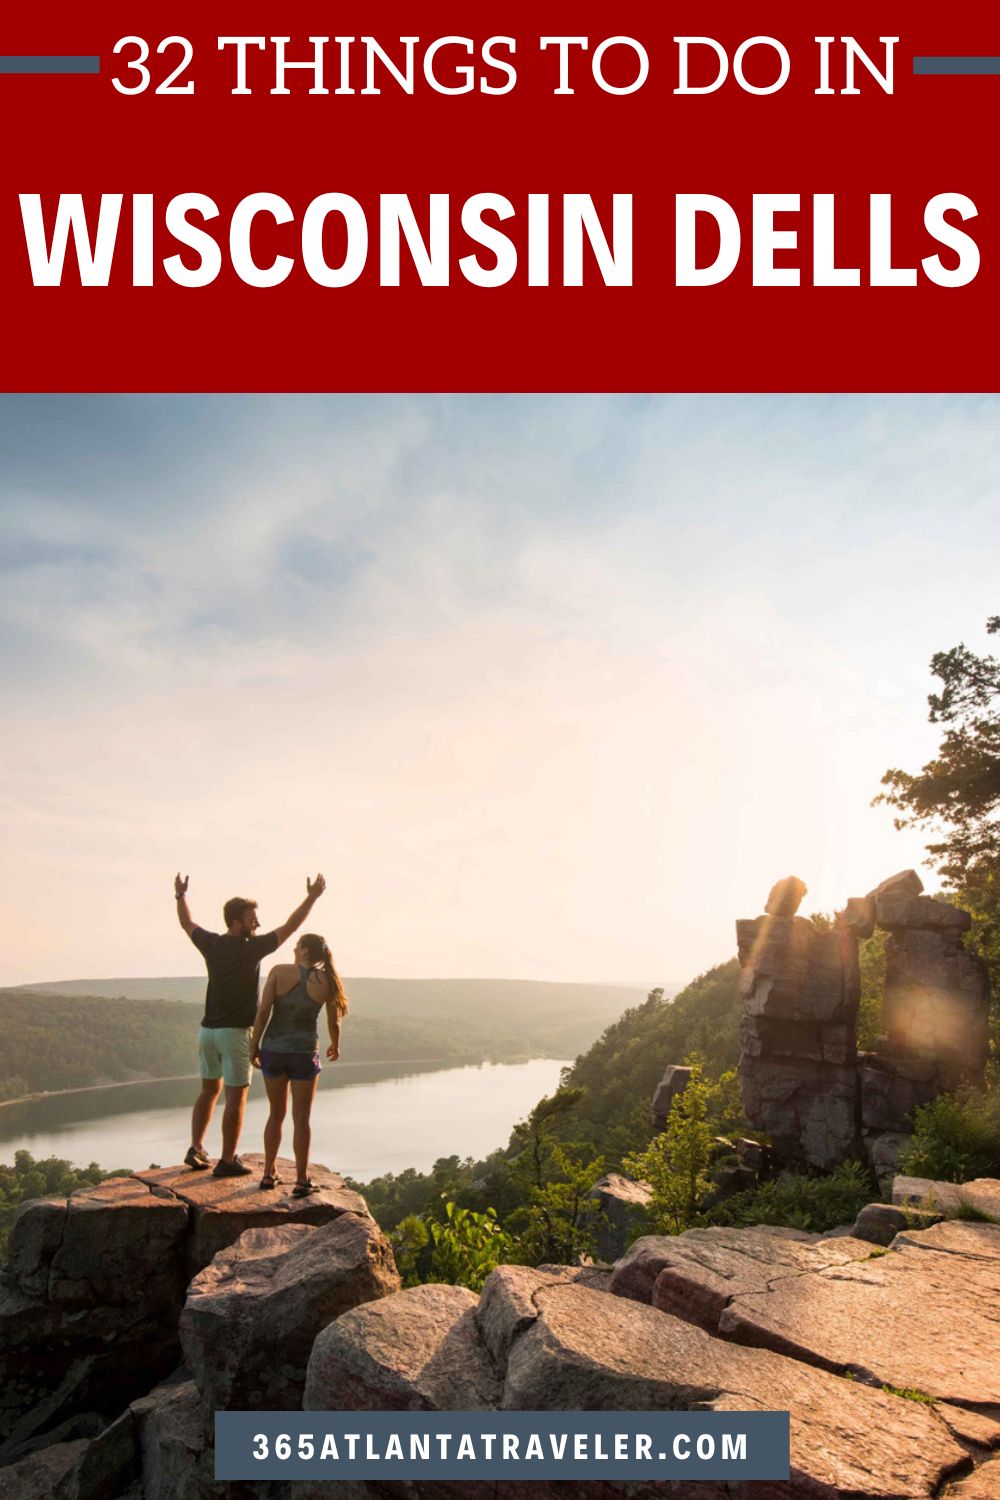 32 Phenomenal Things To Do in Wisconsin Dells